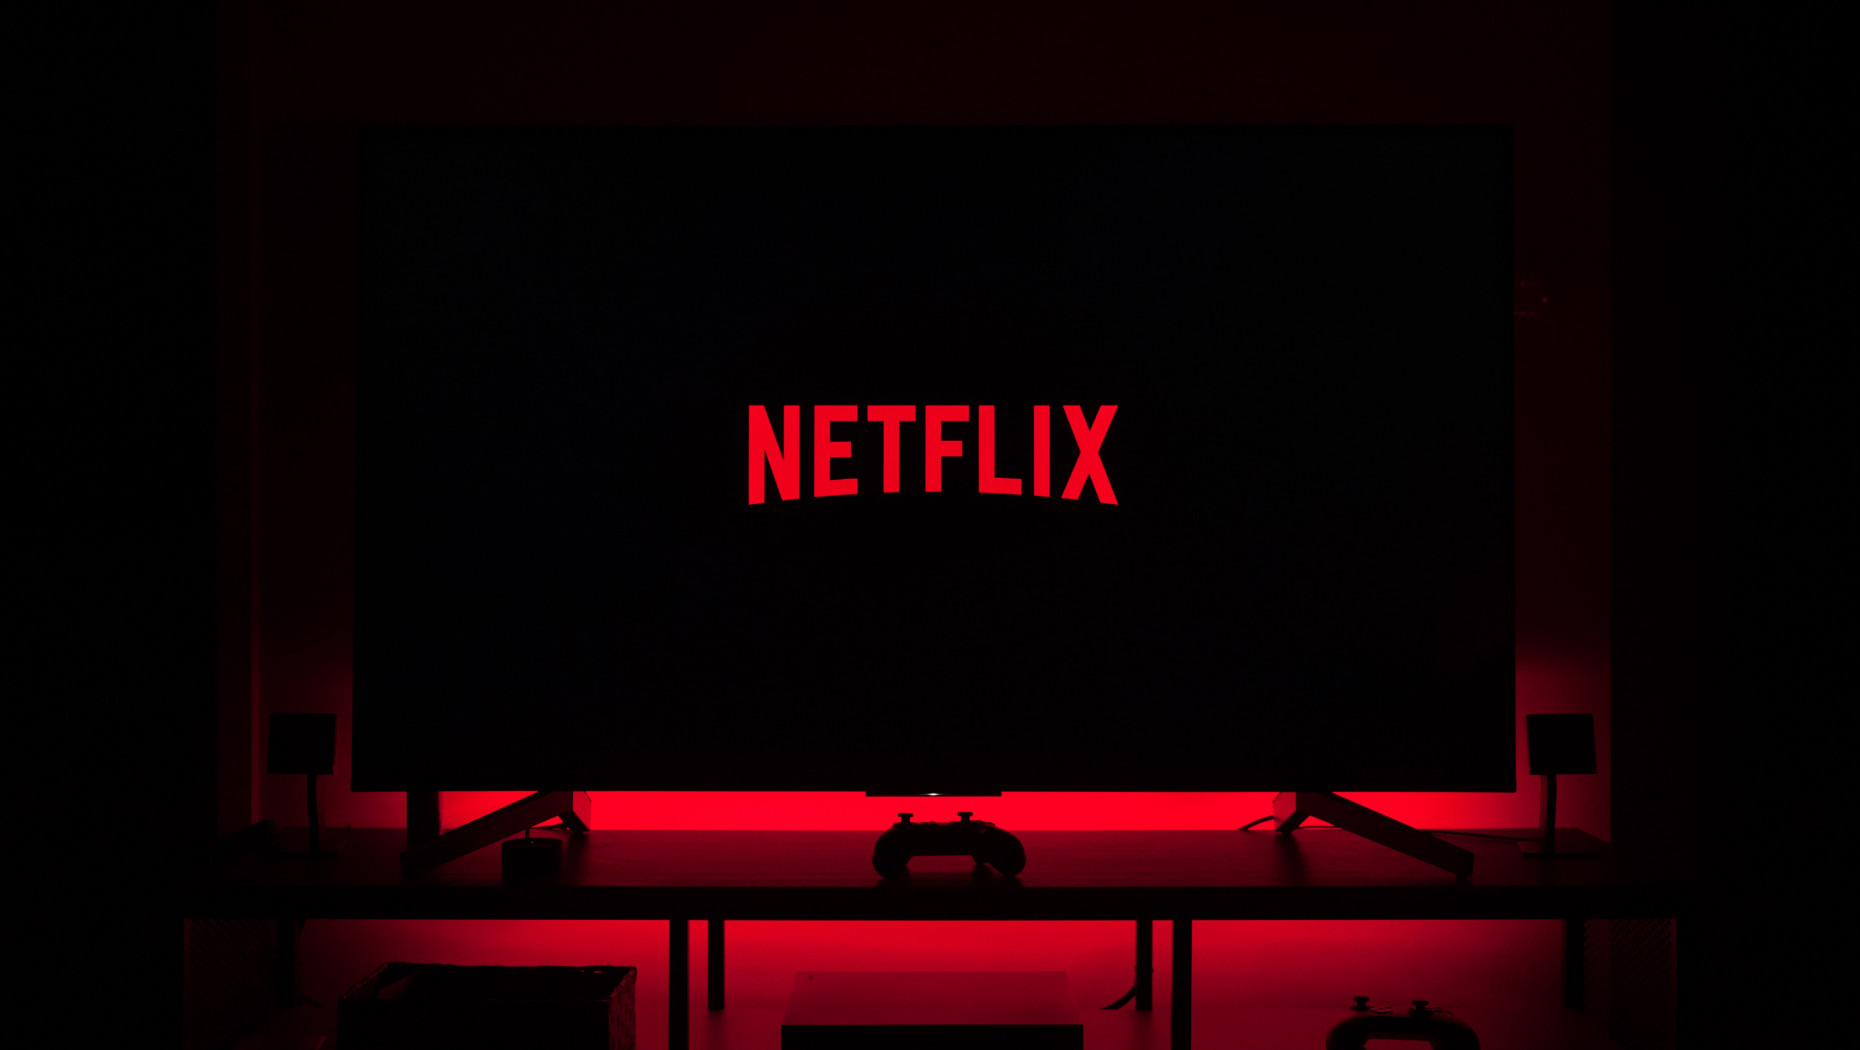 How To Watch Netflix On Projector From iPhone